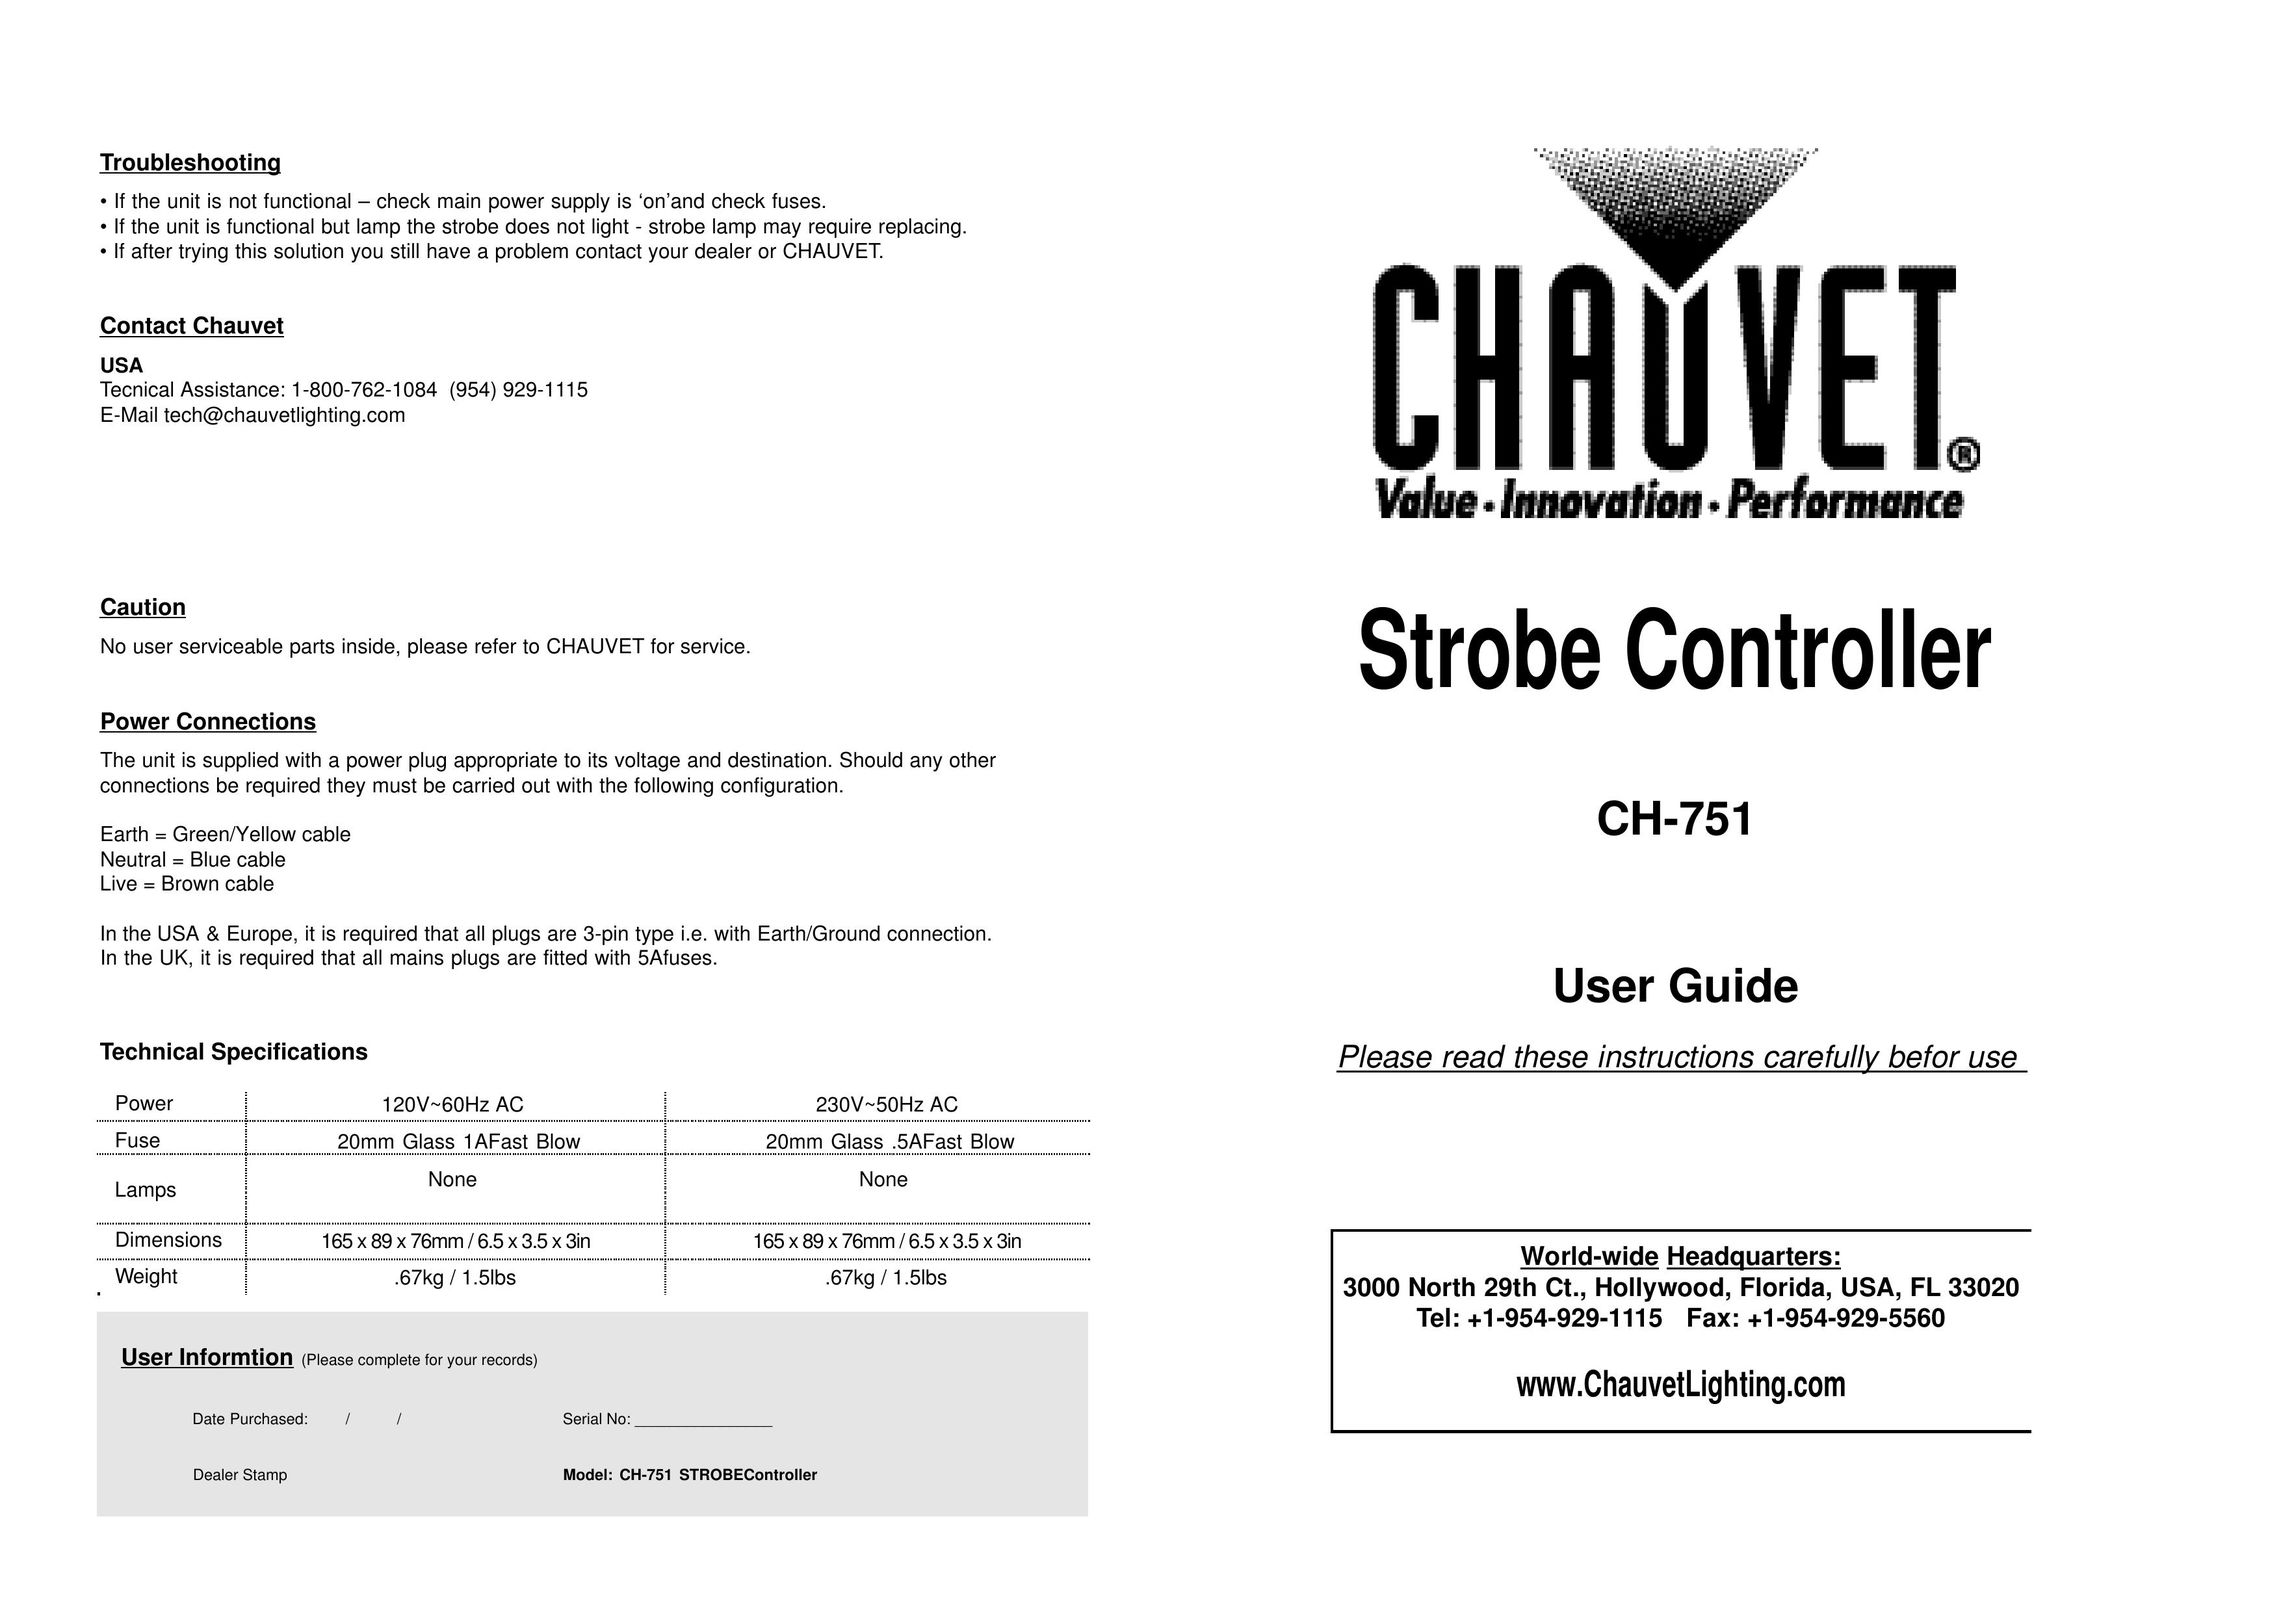 Chauvet CH-751 Stroller User Manual (Page 1)